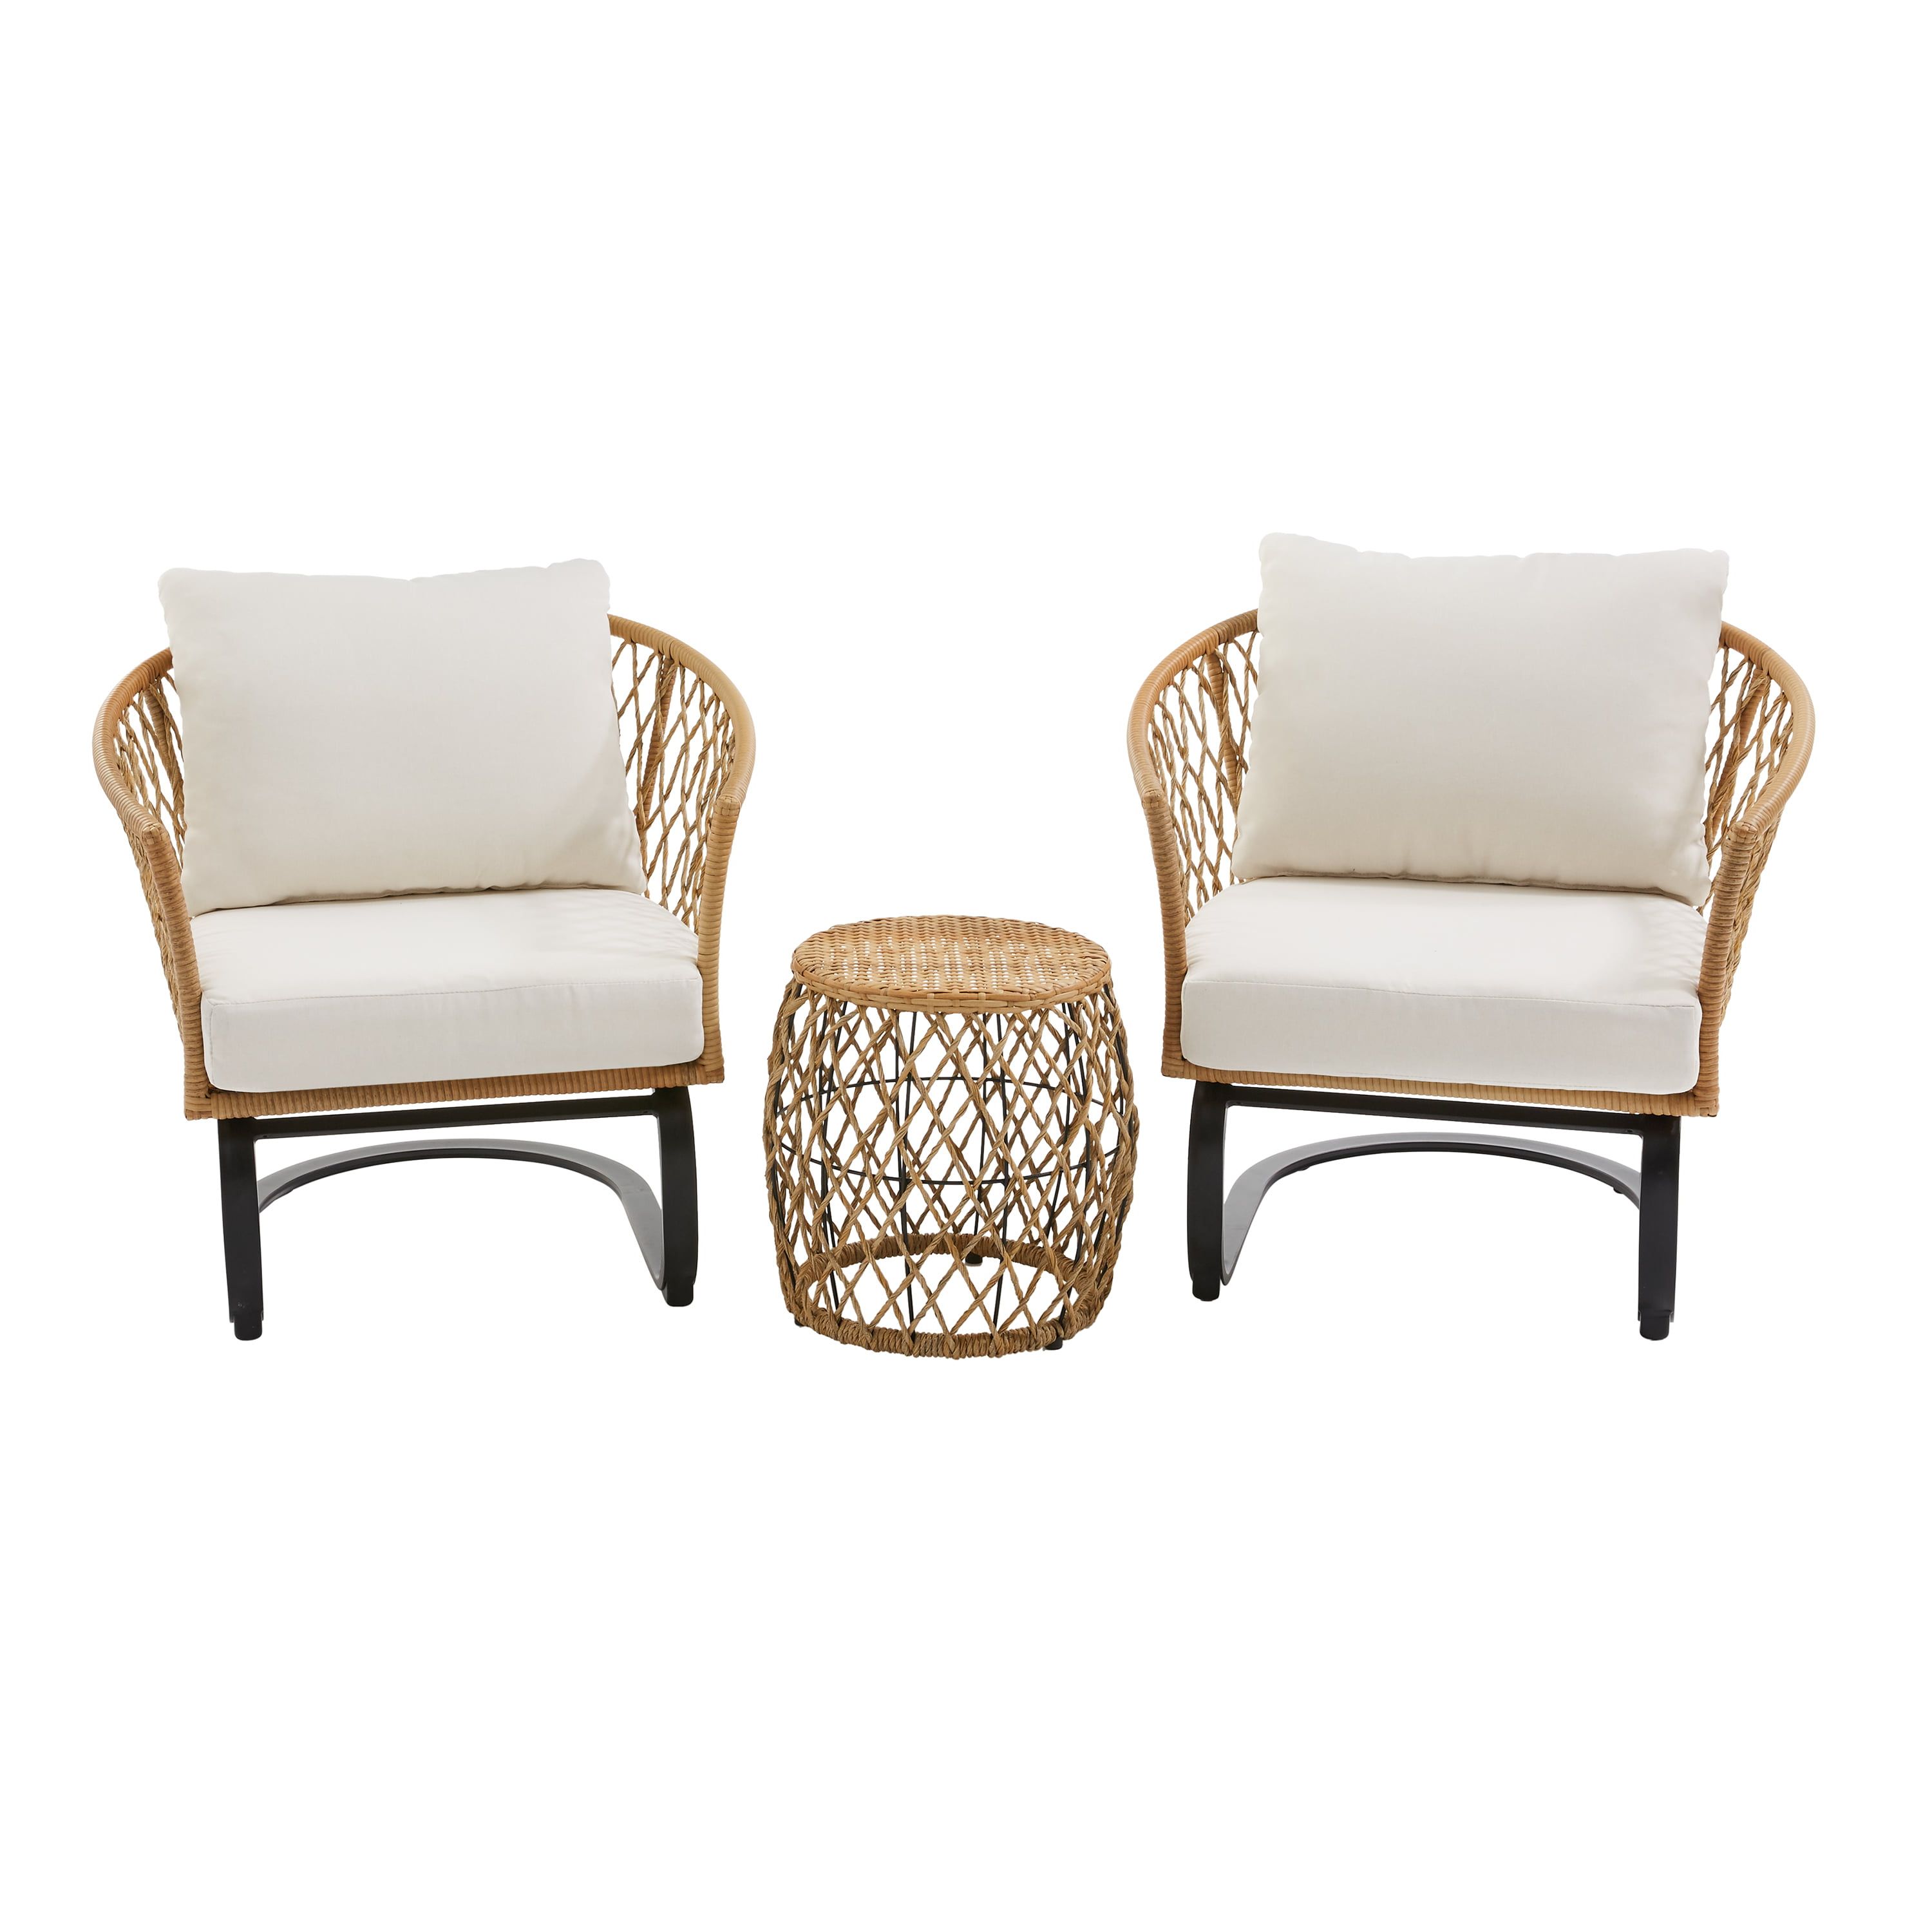 Featured Photo of 15 Best Ideas 3-piece Outdoor Boho Wicker Chat Set